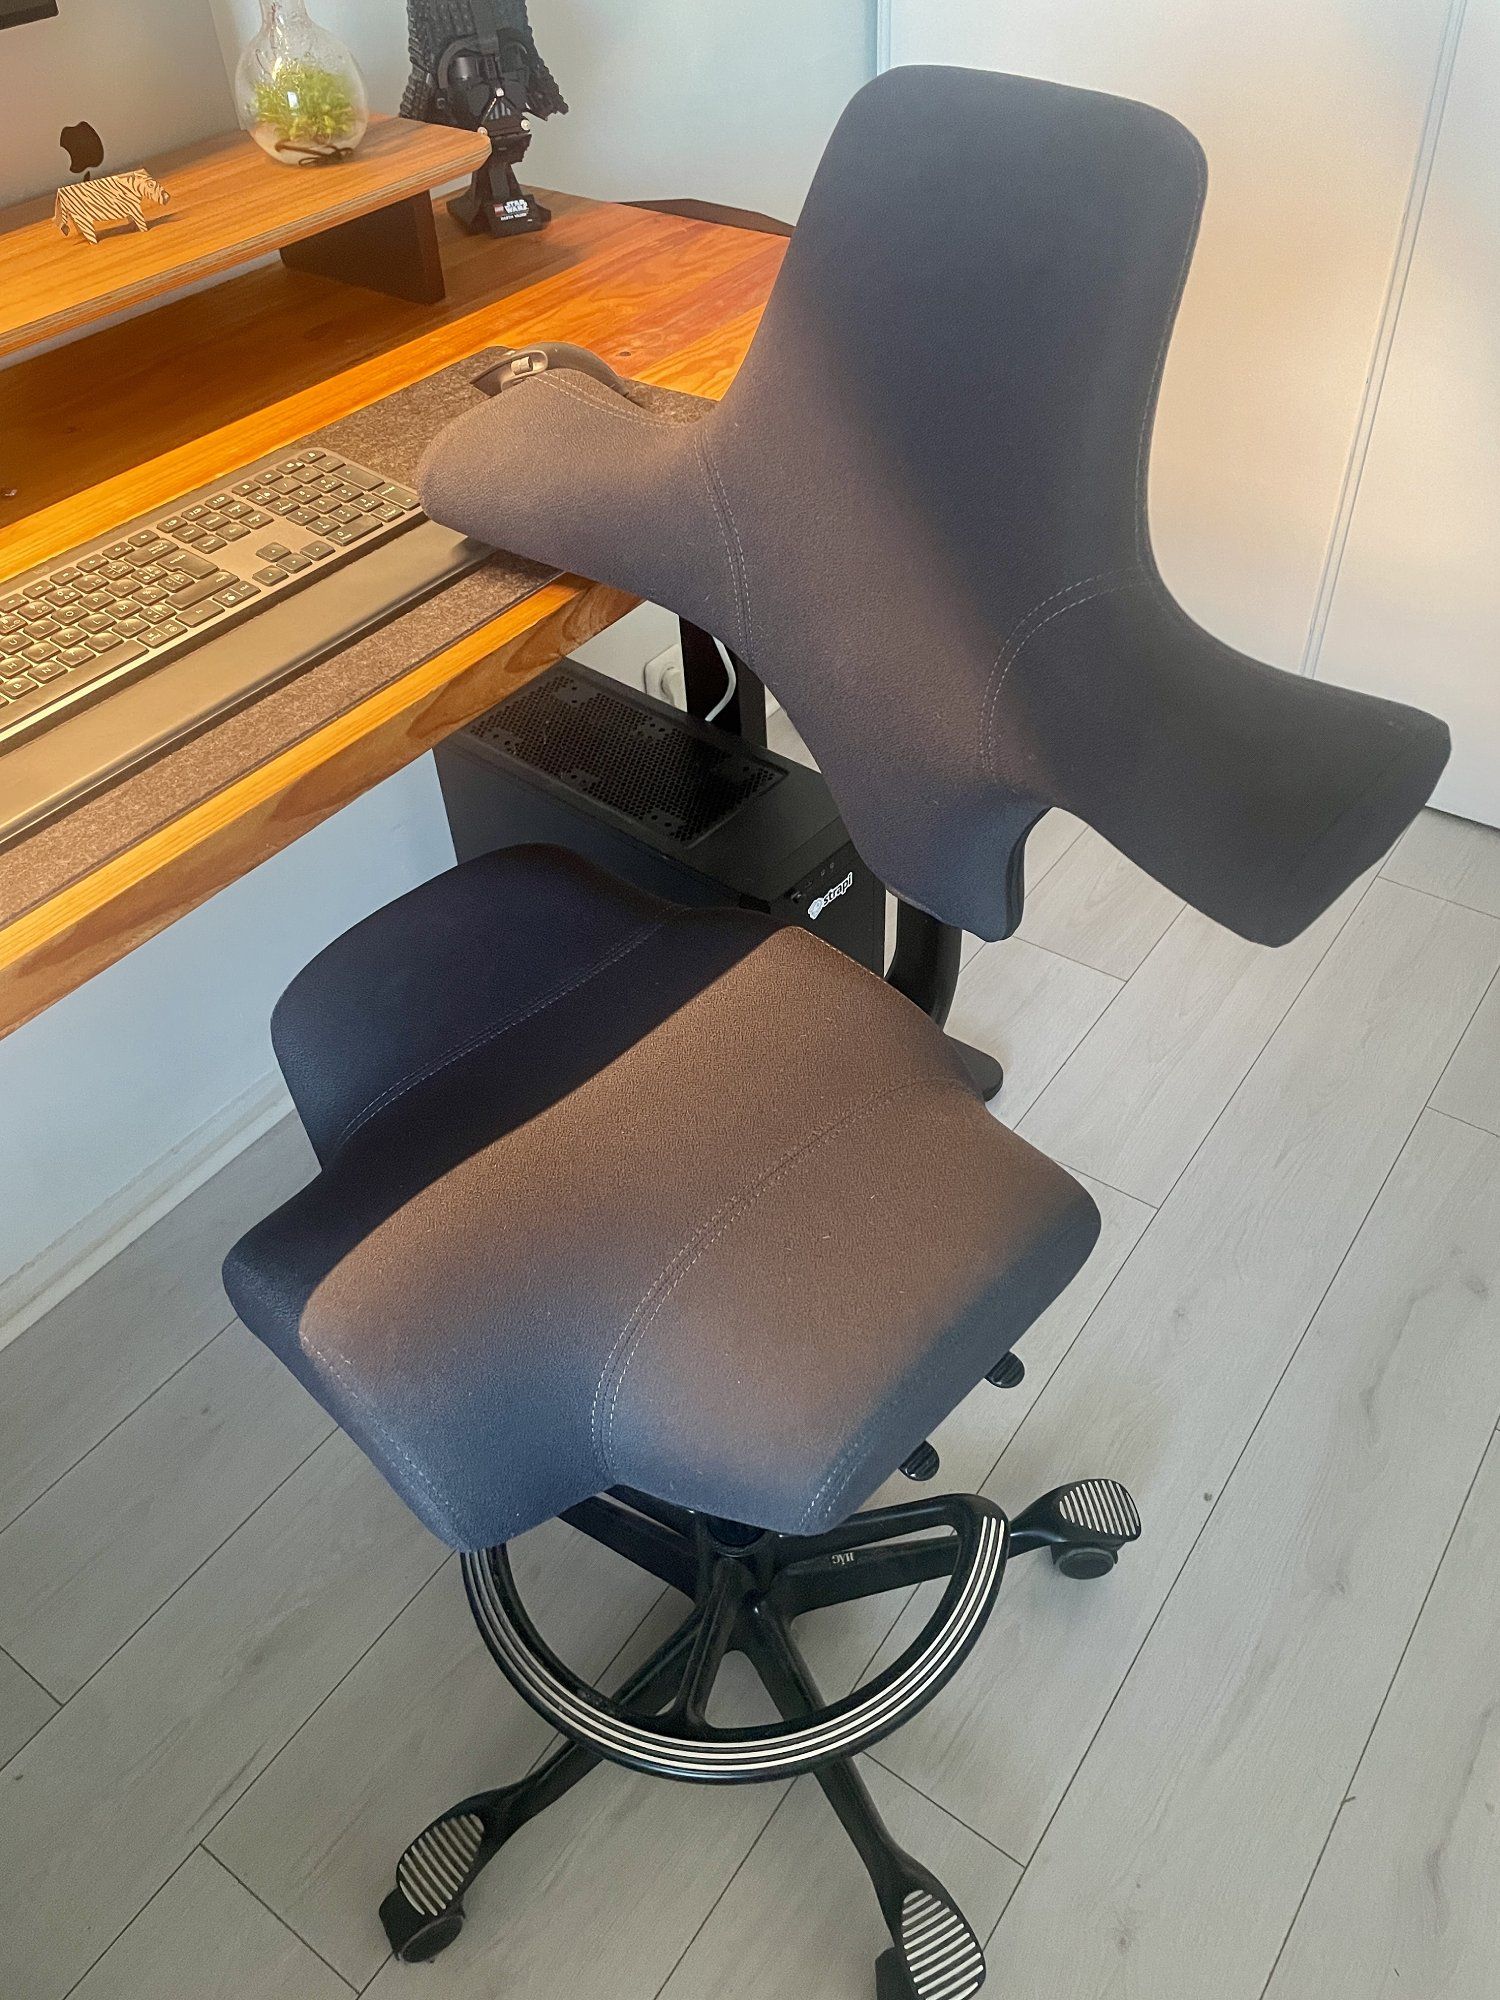 A close-up of an ergonomic HAG Capisco chair in a modern workspace, showcasing its adjustable features and sleek design. The chair comes with a 265mm lift height (overall chair height is 51.5″; seat height is 22.5-33″), which is handy to use with a standing desk